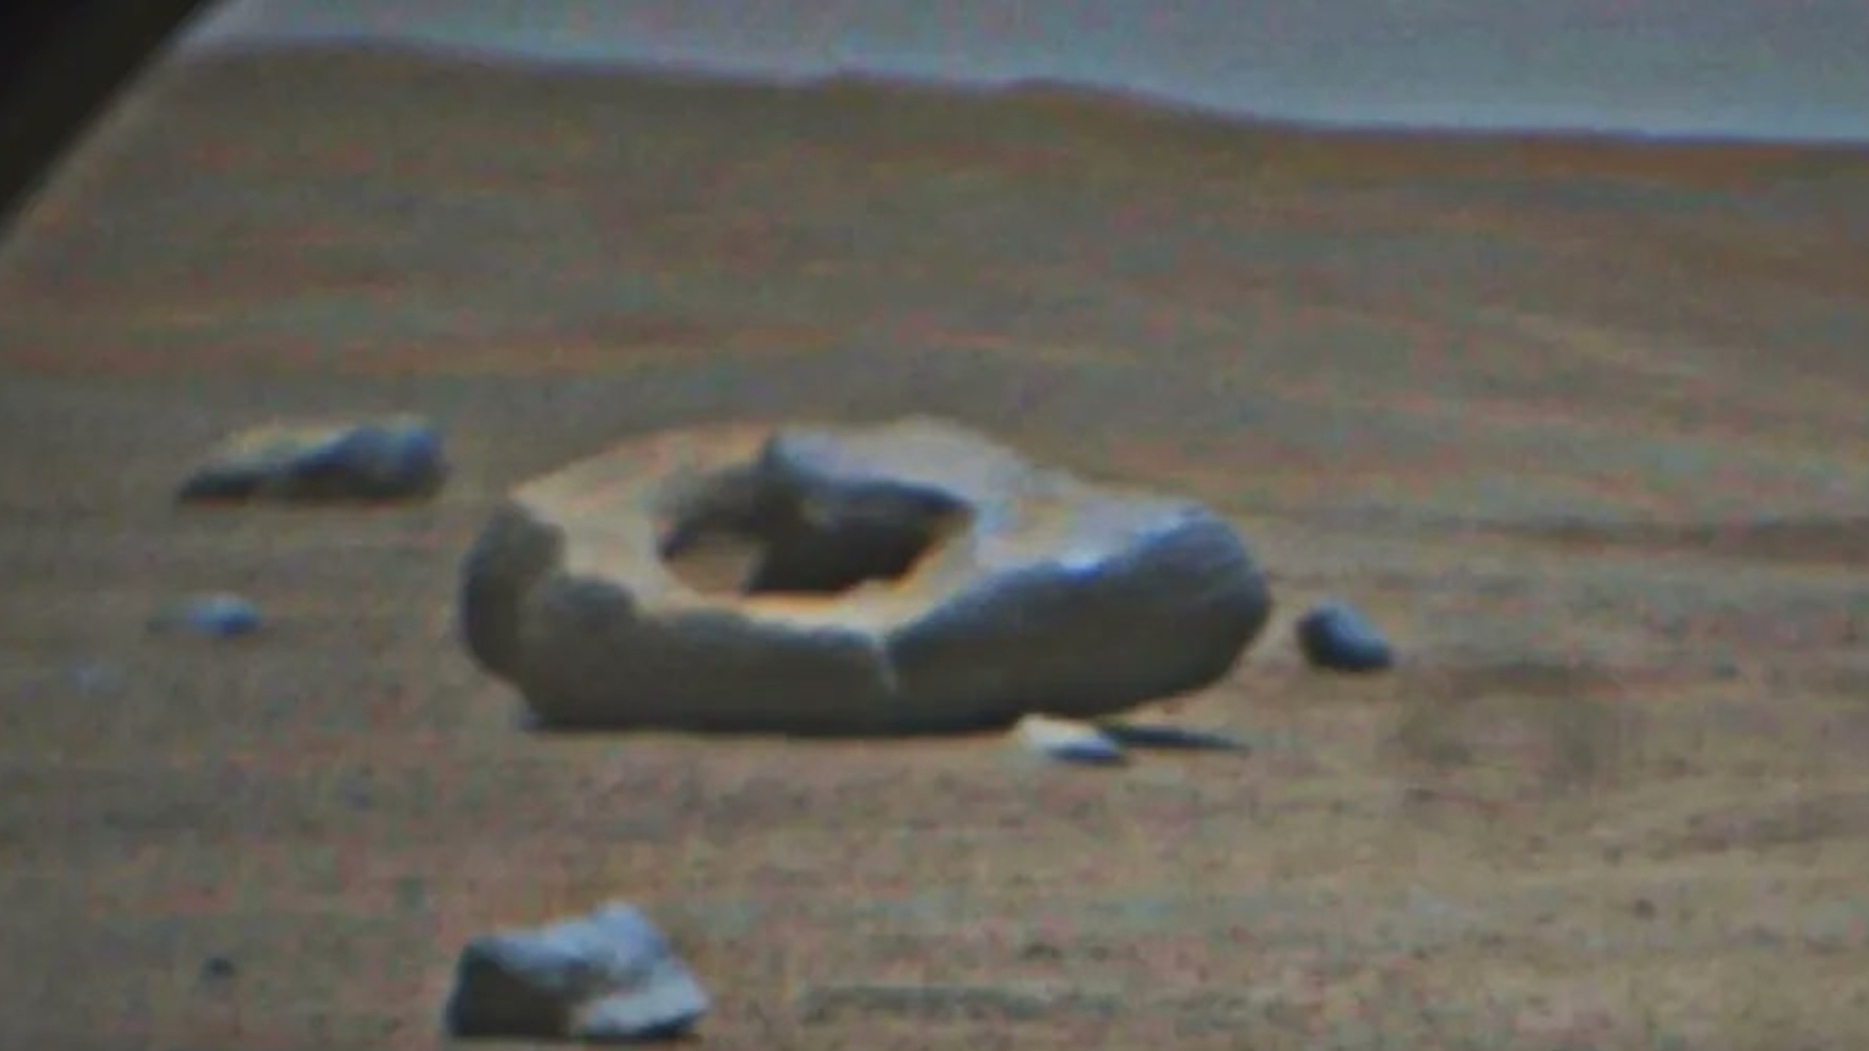 Mars donut! Perseverance rover spots holey Red Planet rock